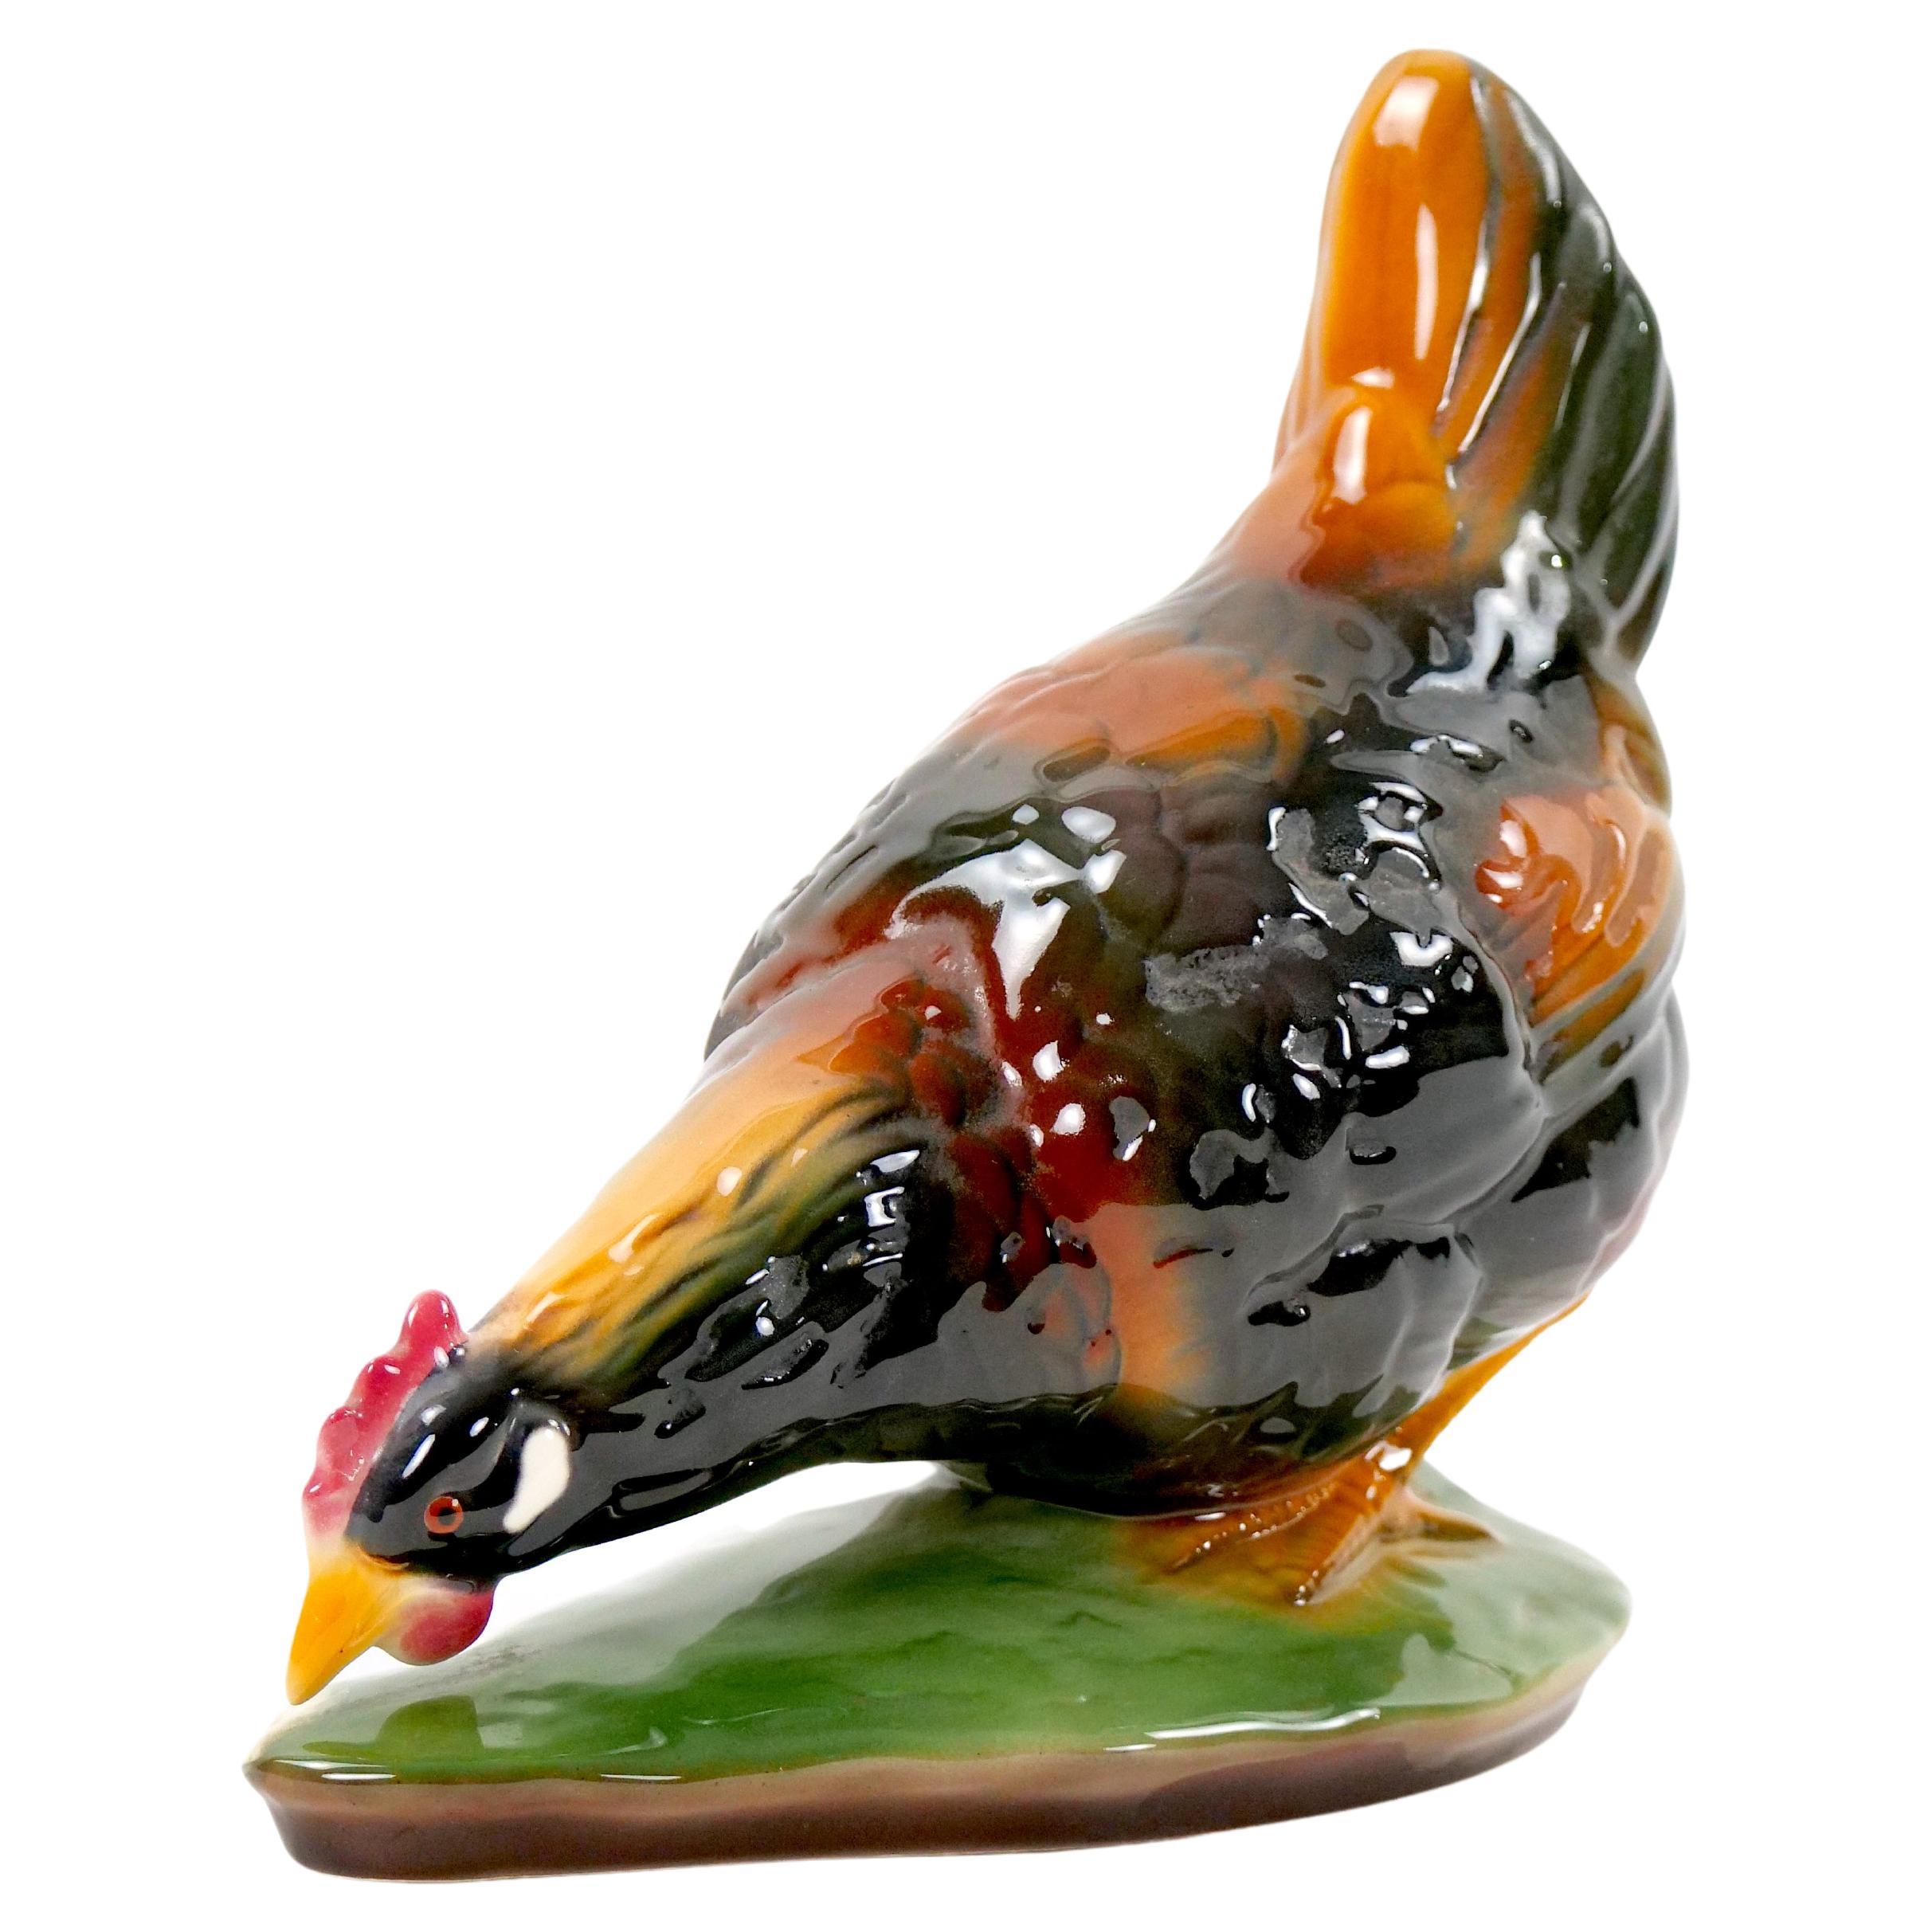 Hand Grafted / Painted Glazed Porcelain Tableware Decorative Sculpture For Sale